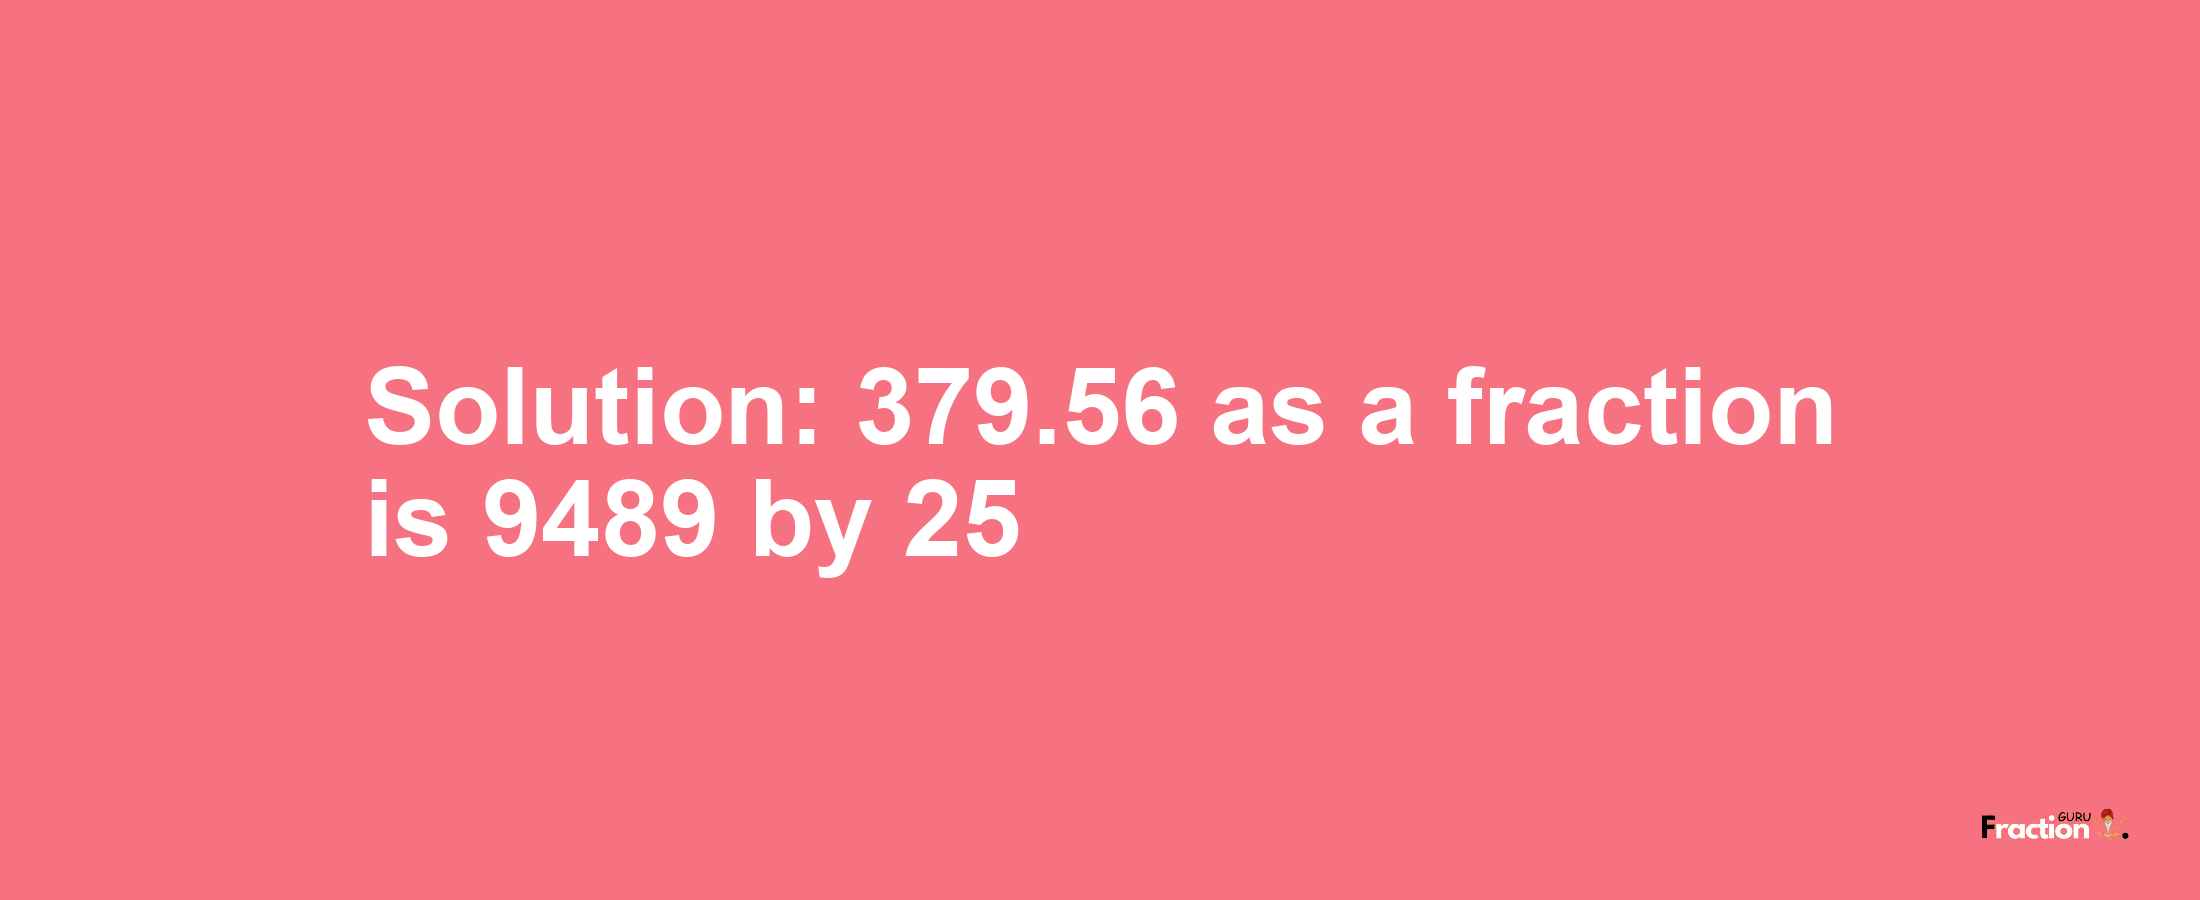 Solution:379.56 as a fraction is 9489/25